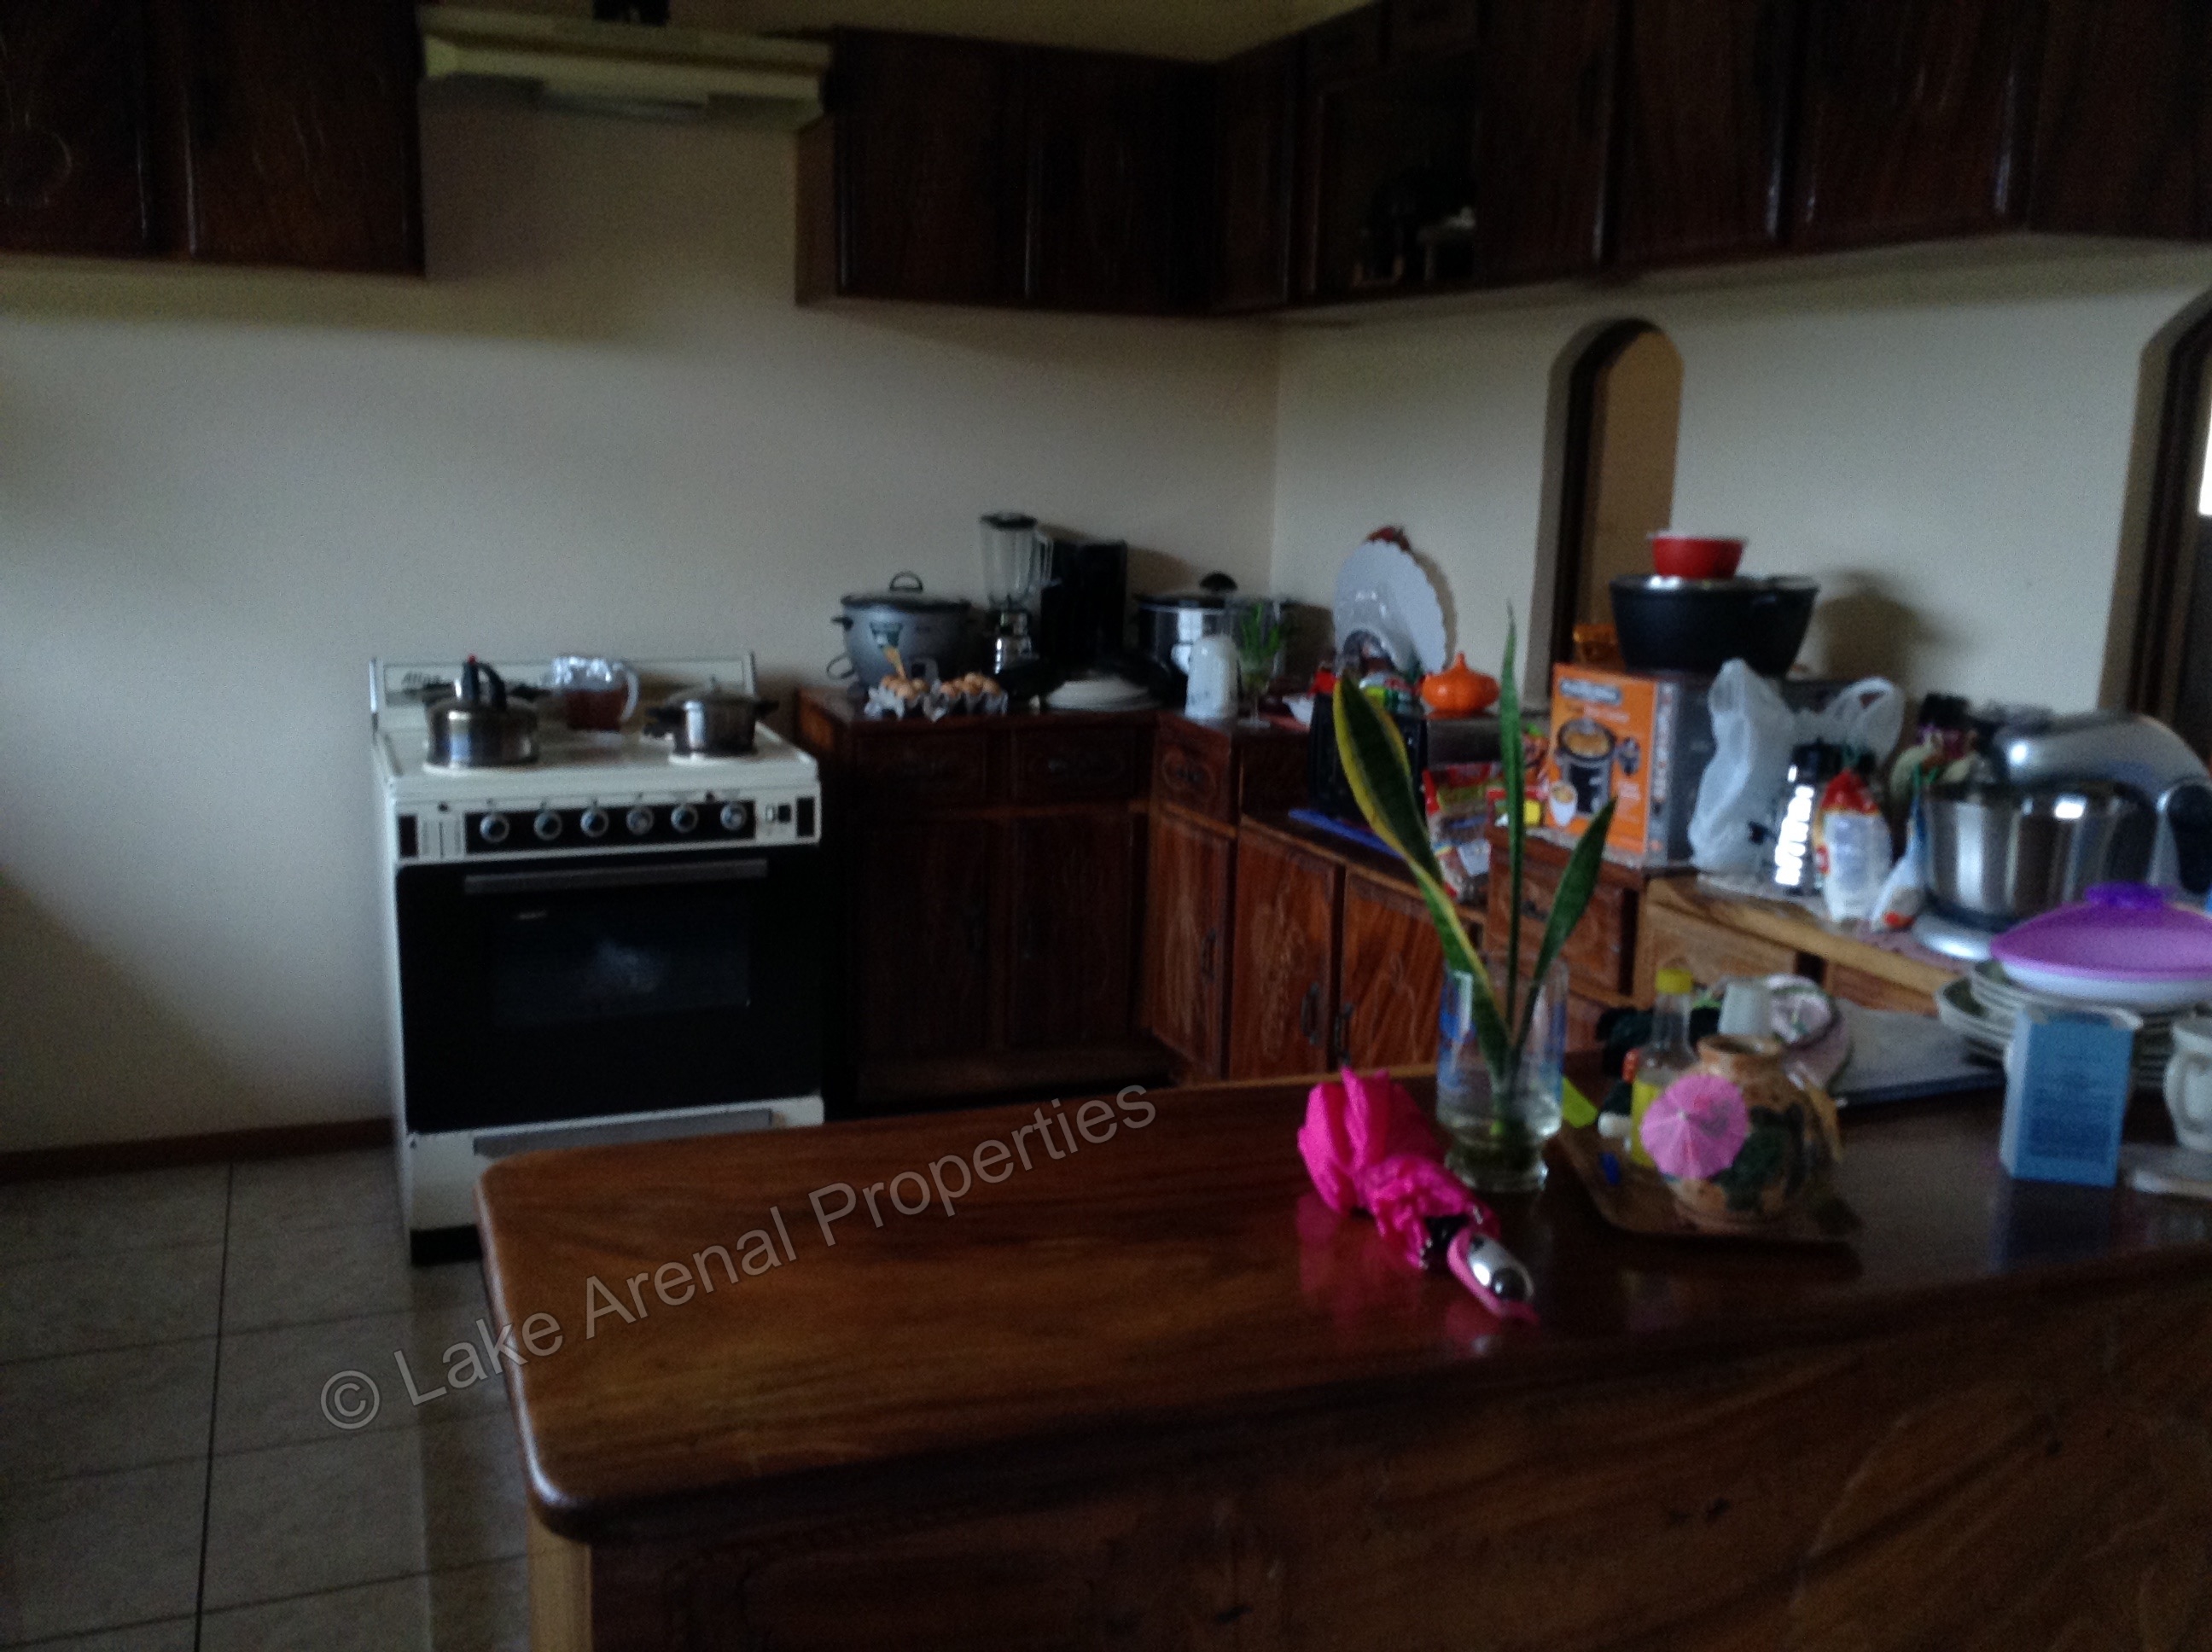 Unfurnished Home with Garage in Nuevo Arenal - Lake Arenal Properties